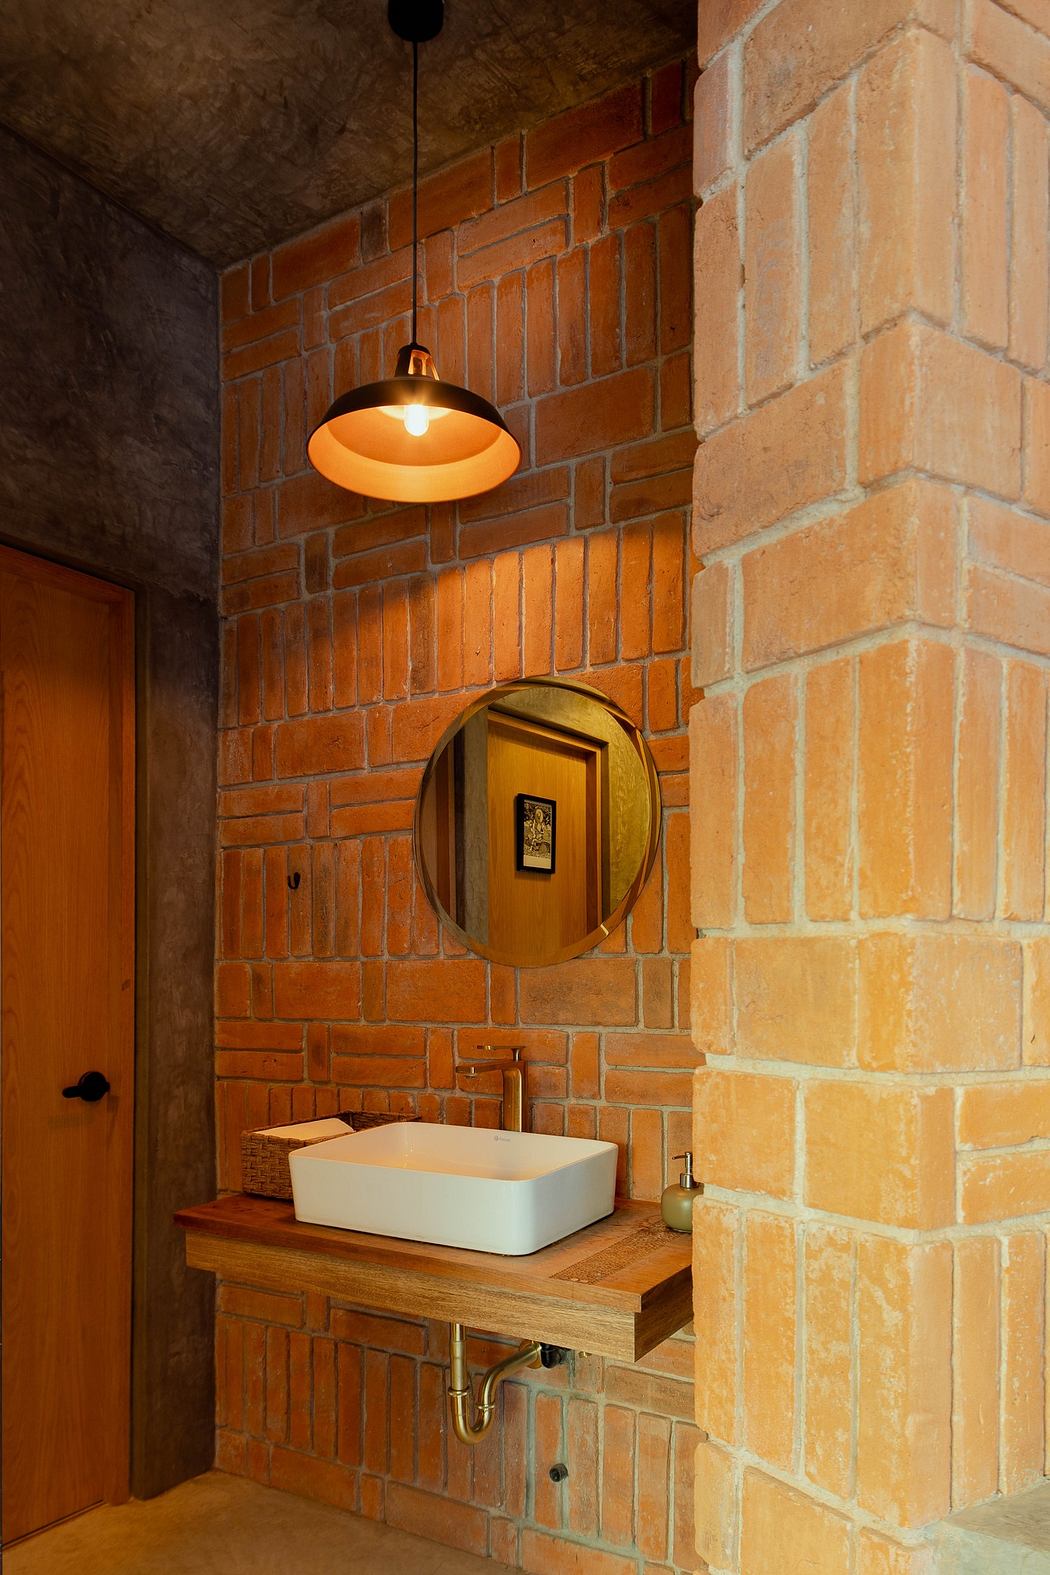 Modern bathroom with exposed brick walls and wooden vanity.